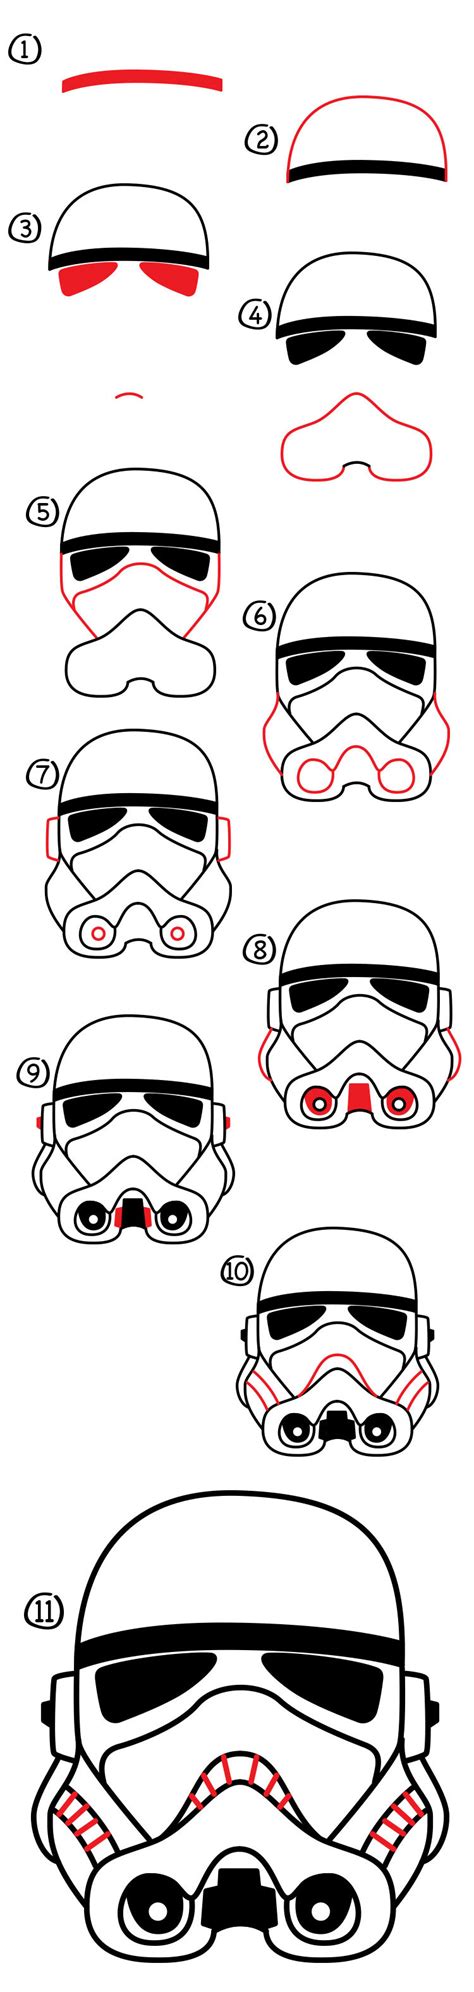 How To Draw A Clone Helmet